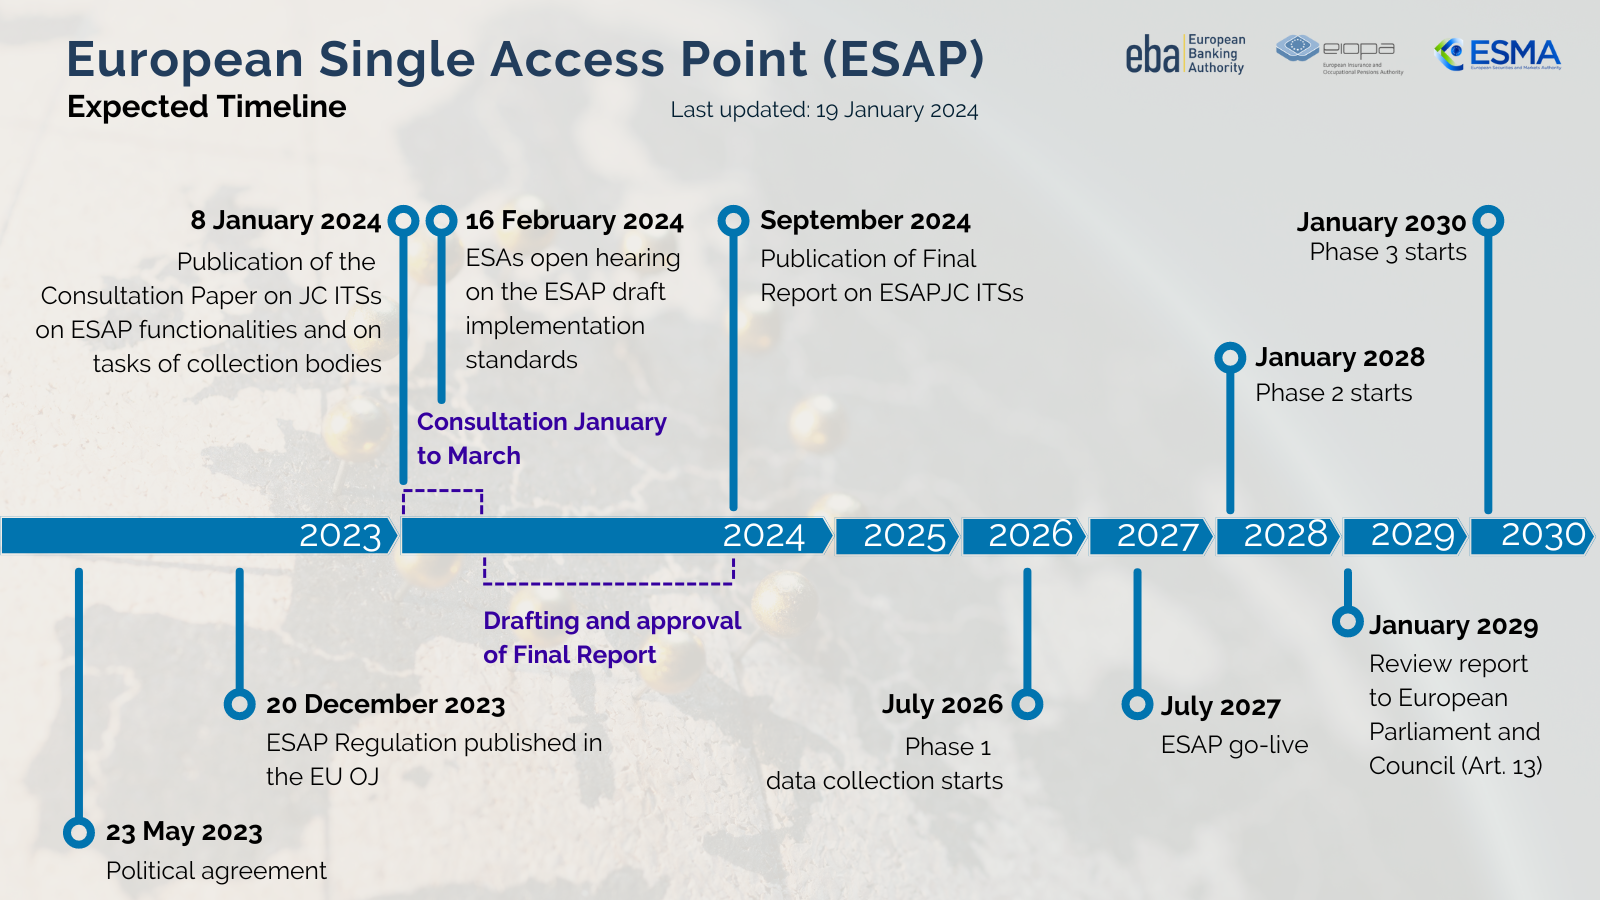 ESAP expected timeline